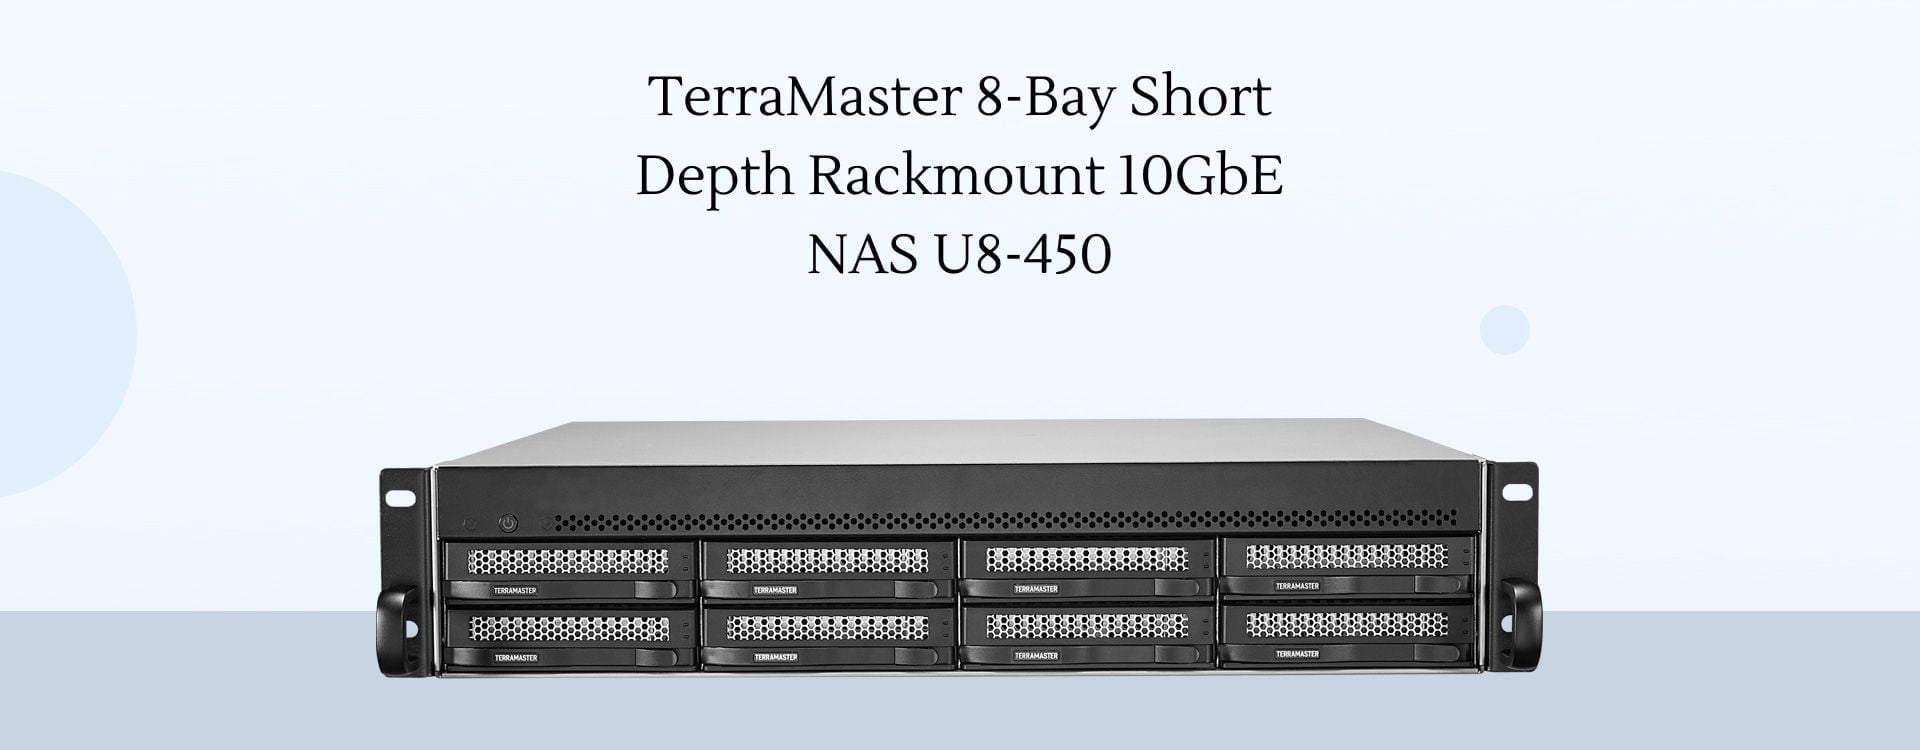 TerraMaster 8-Bay Short Depth Rackmount 10GbE NAS U8-450 Launched for £1100